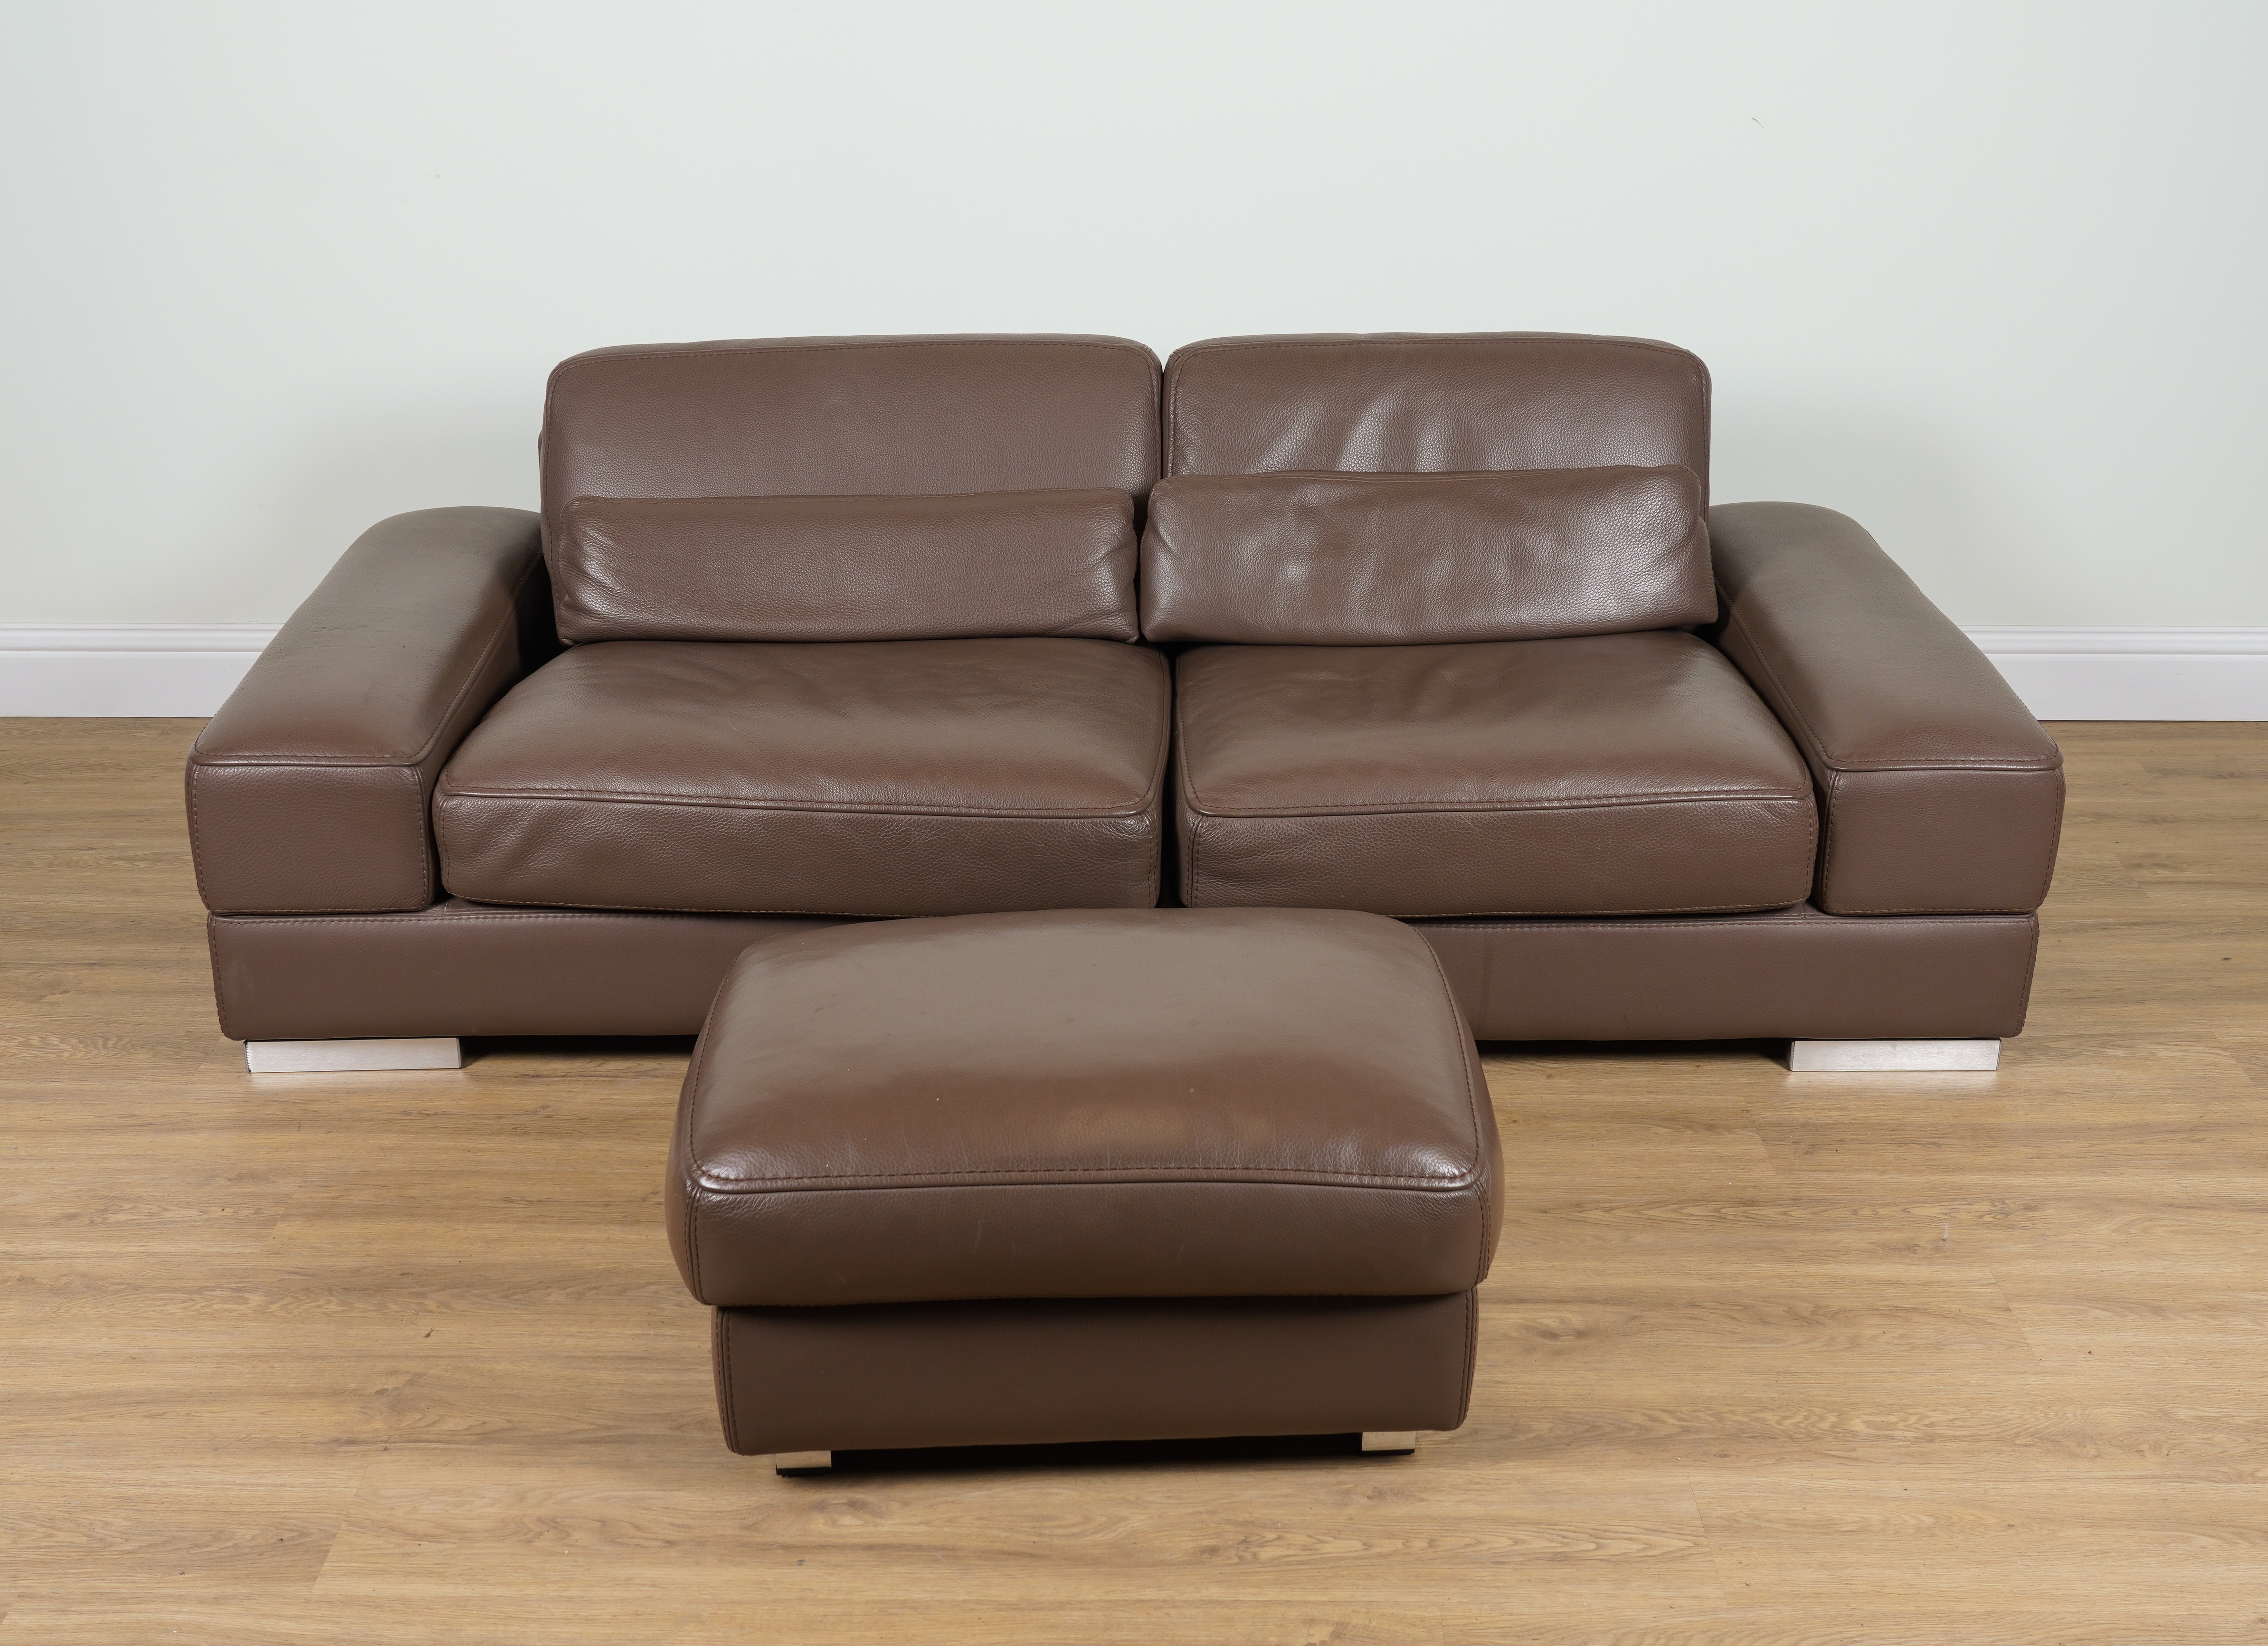 ROCHE BOBOIS A BROWN LEATHER UPHOLSTERED 3ae522